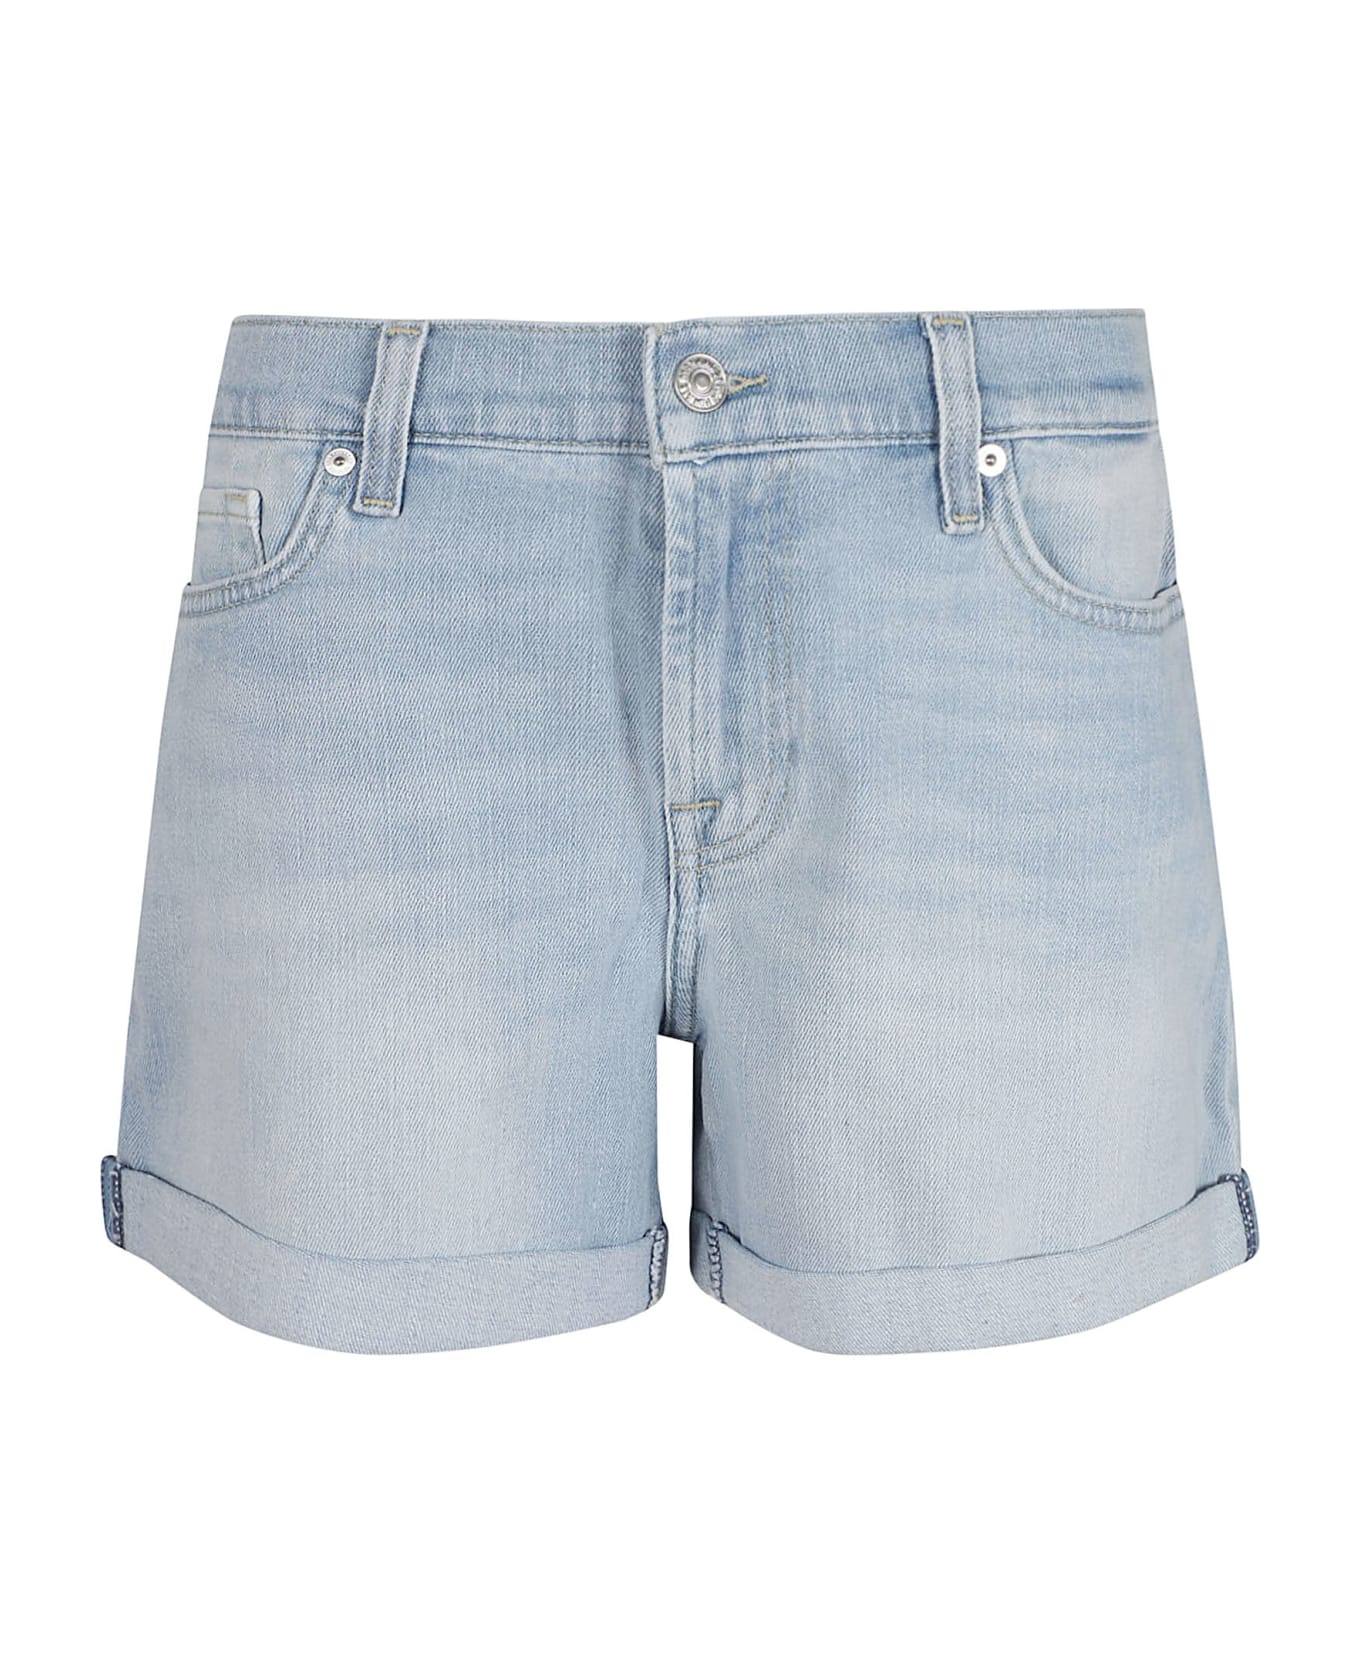 7 For All Mankind Mid Roll Shorts Soul - Light Blue ショートパンツ